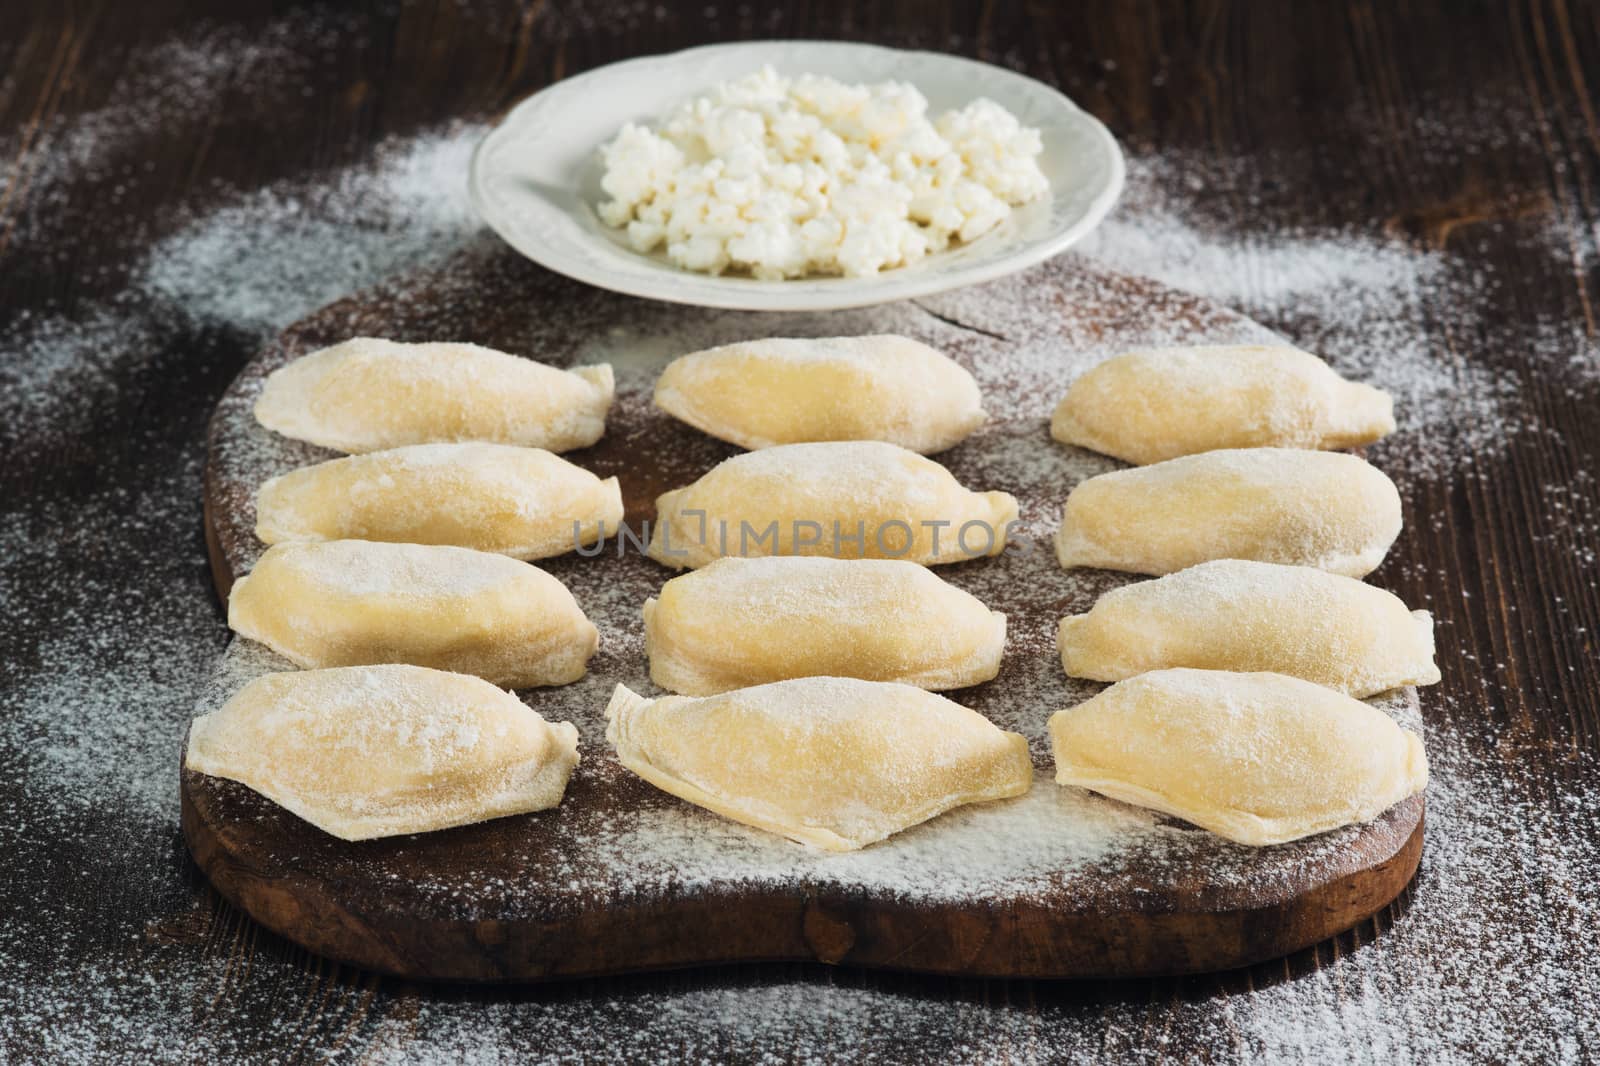 Raw dumplings with cottage cheese on the board